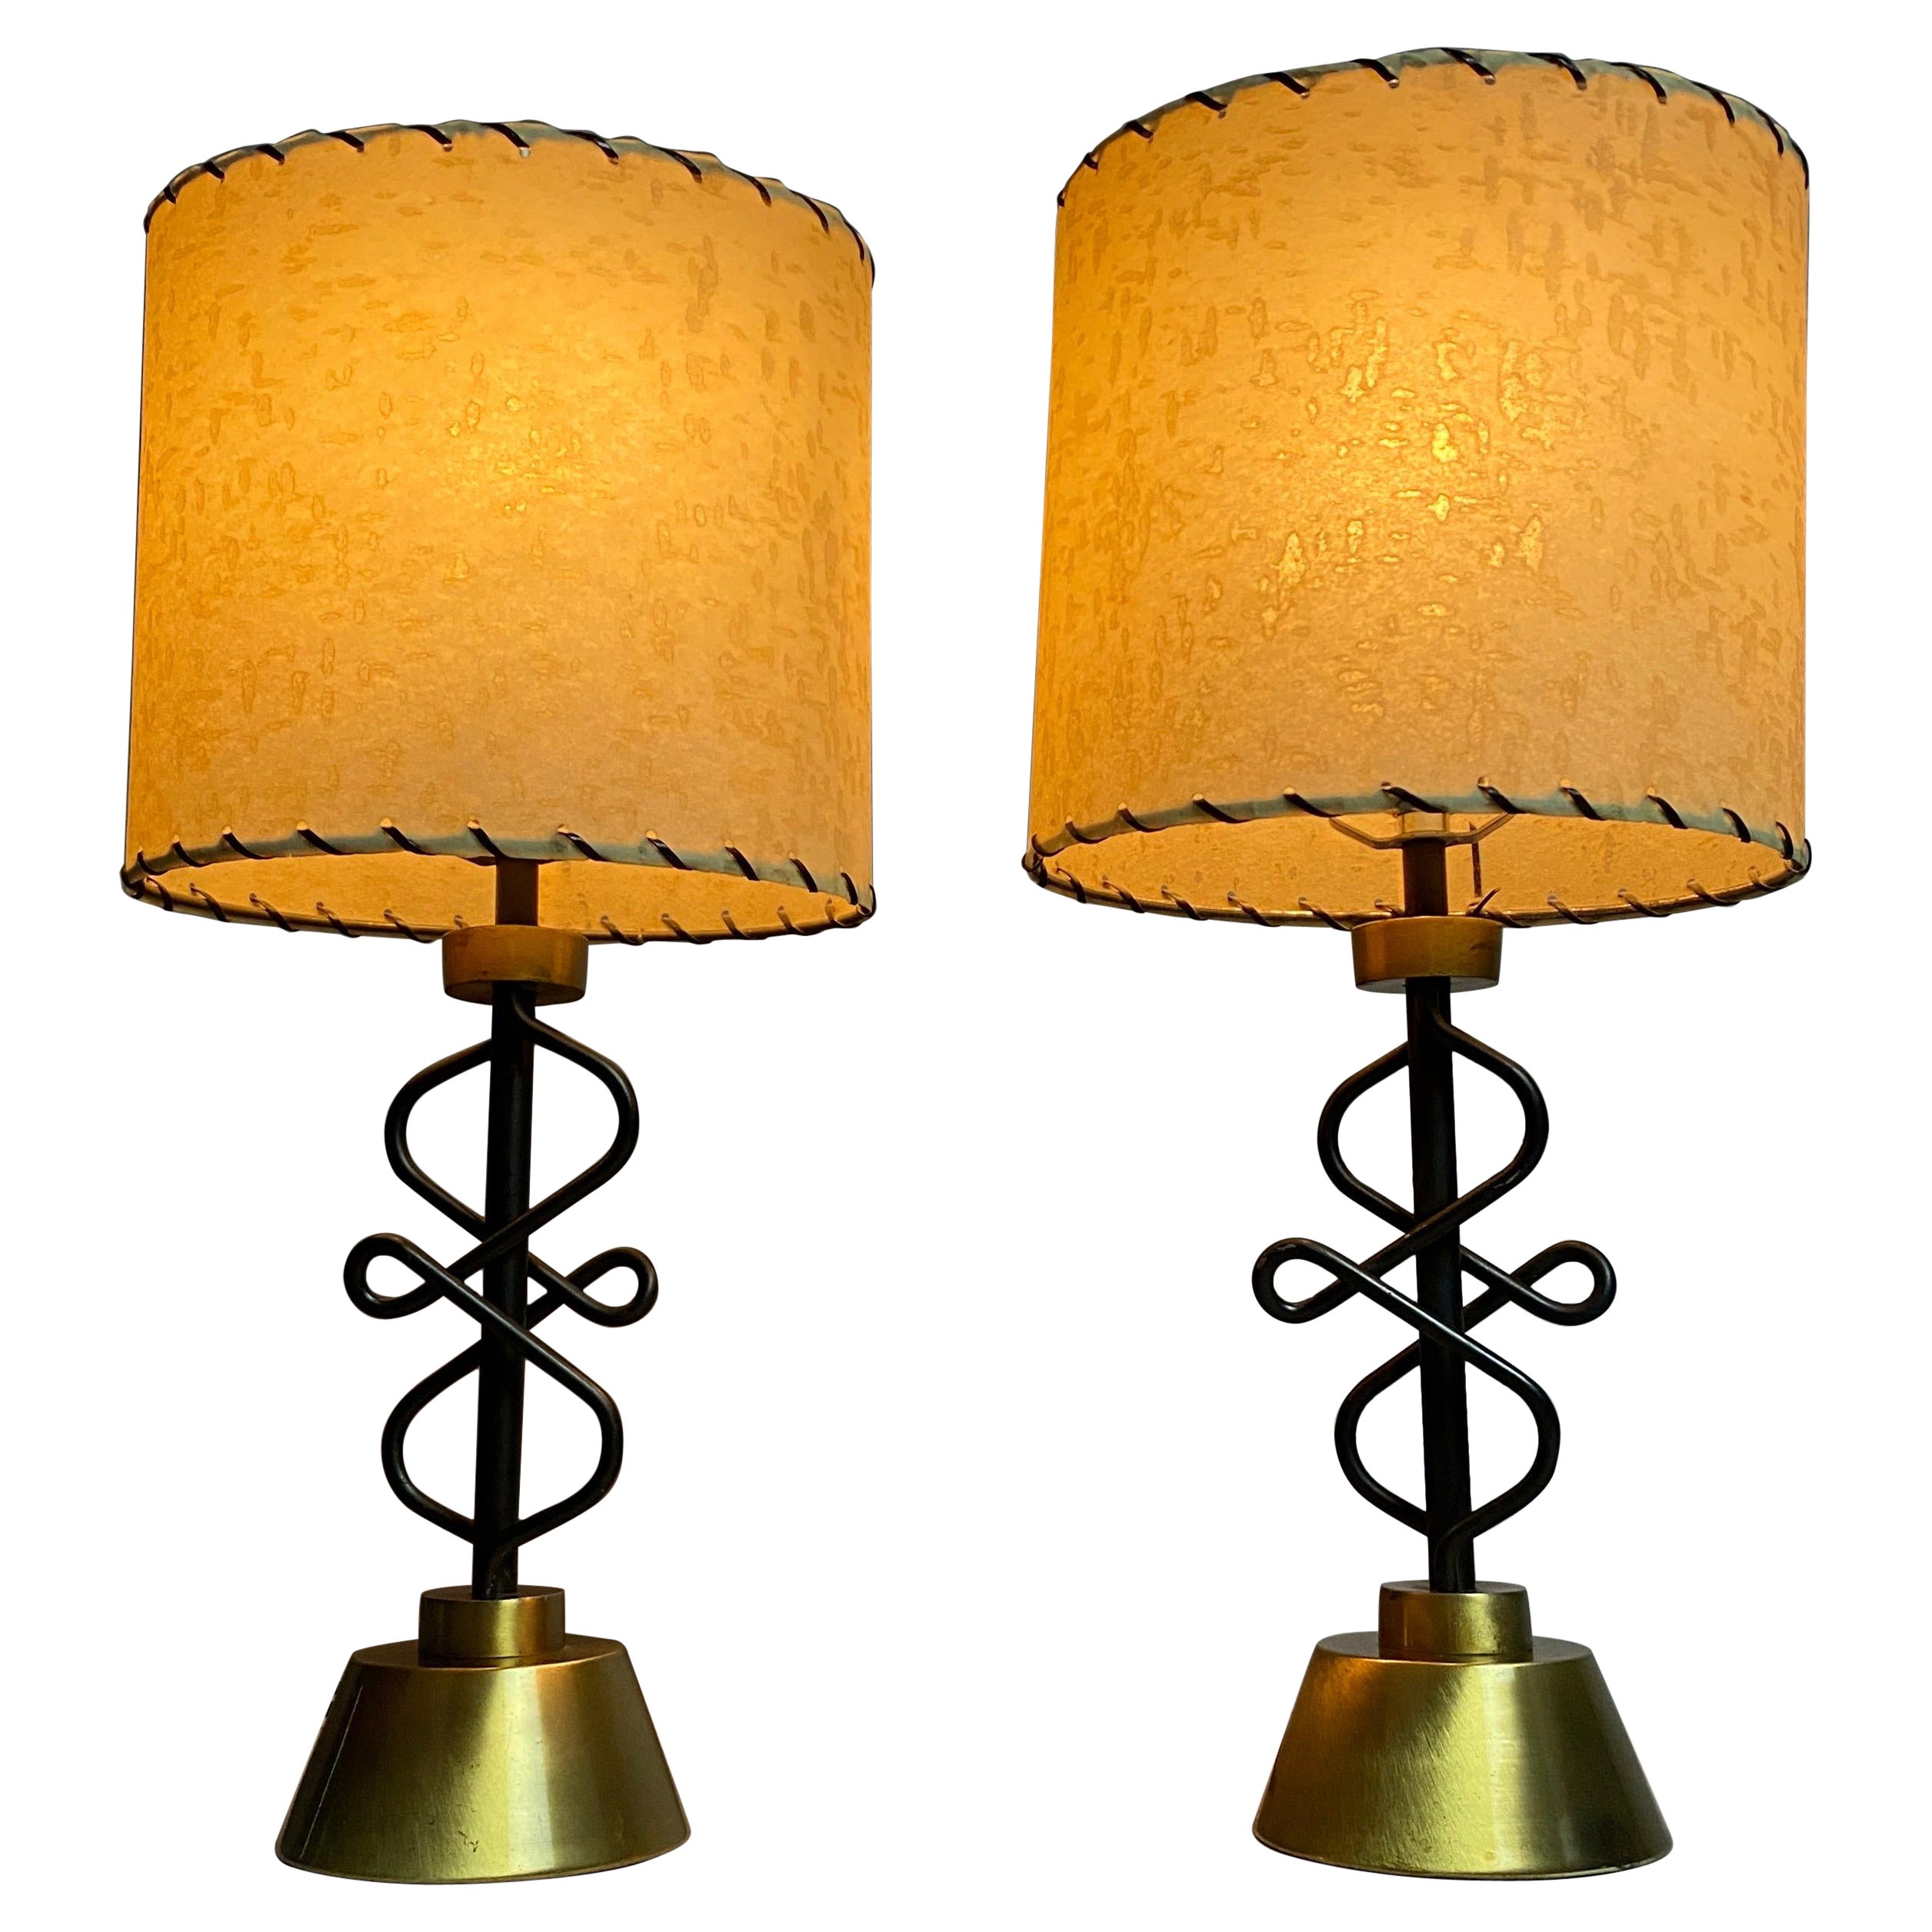 Table Lamps by The Majestic Lamp Co.